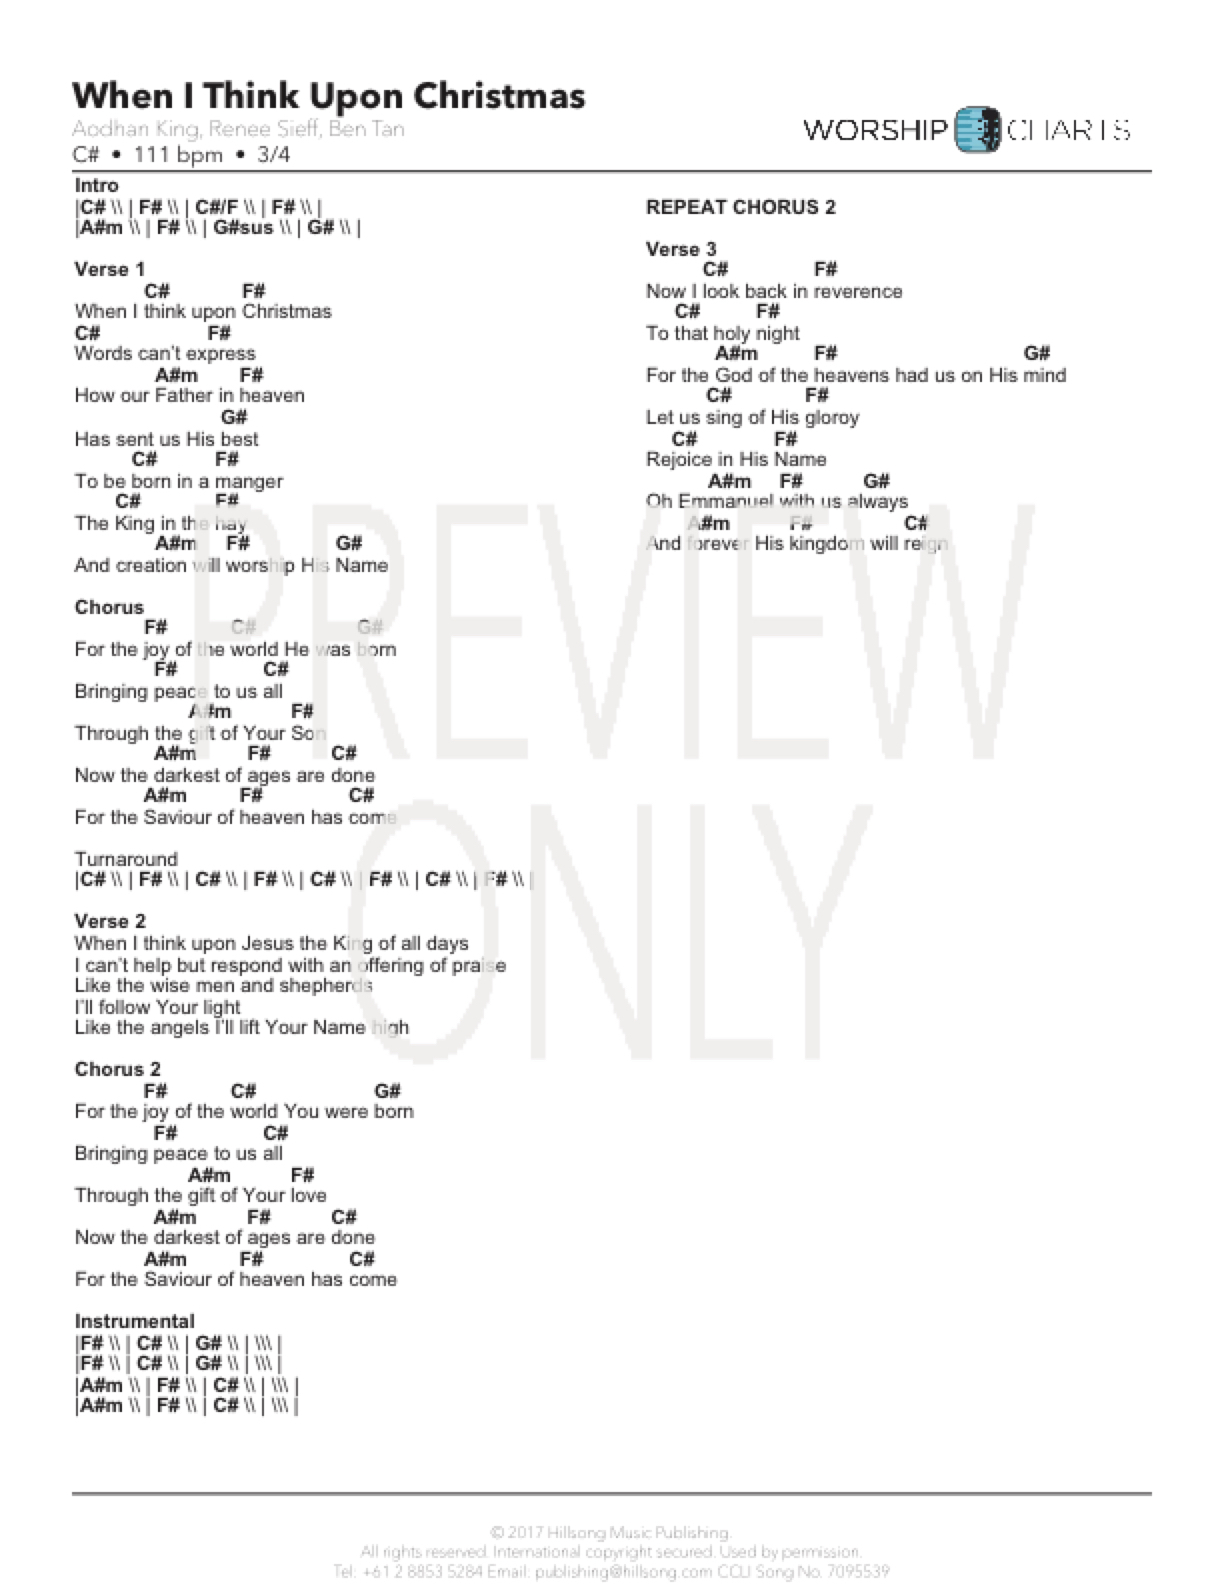 Forever Reign Chords When I Think Upon Christmas Lead Sheet Lyrics Chords Hillsong